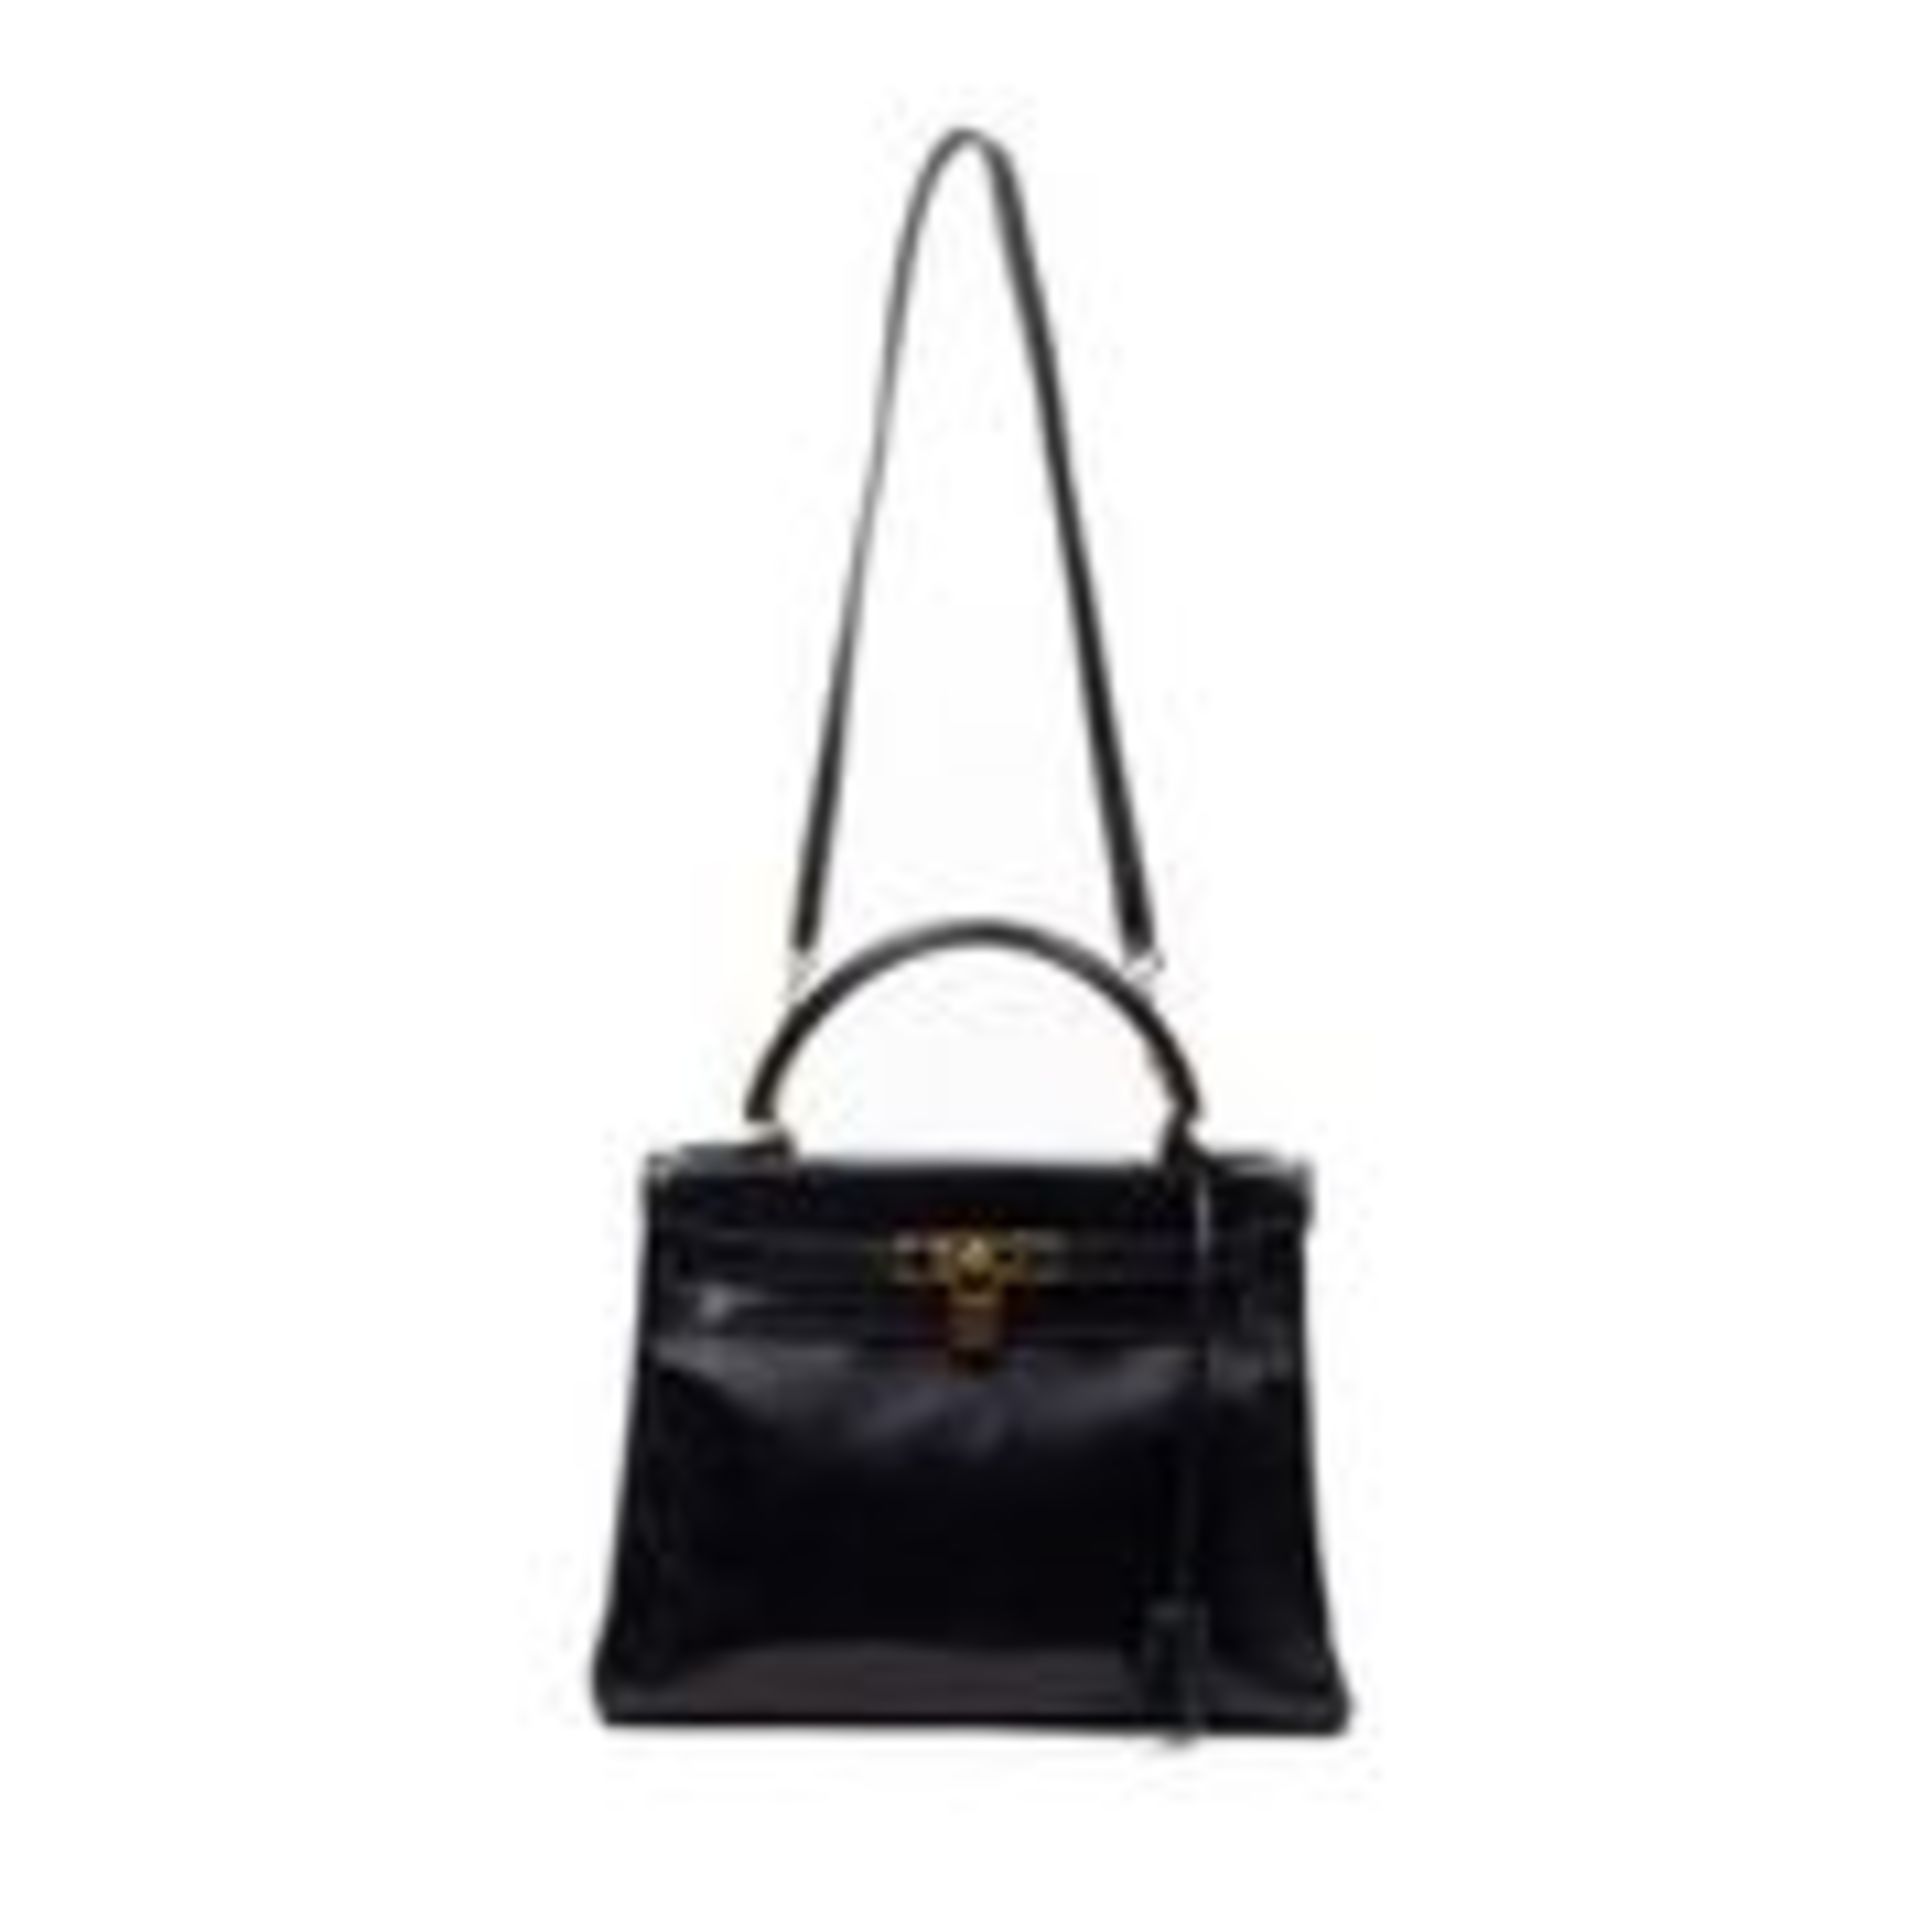 Vintage Hermes Kelly Handbag Navy Blue - EAG5035 - Grade AB - Please Contact Us Directly For - Image 2 of 5